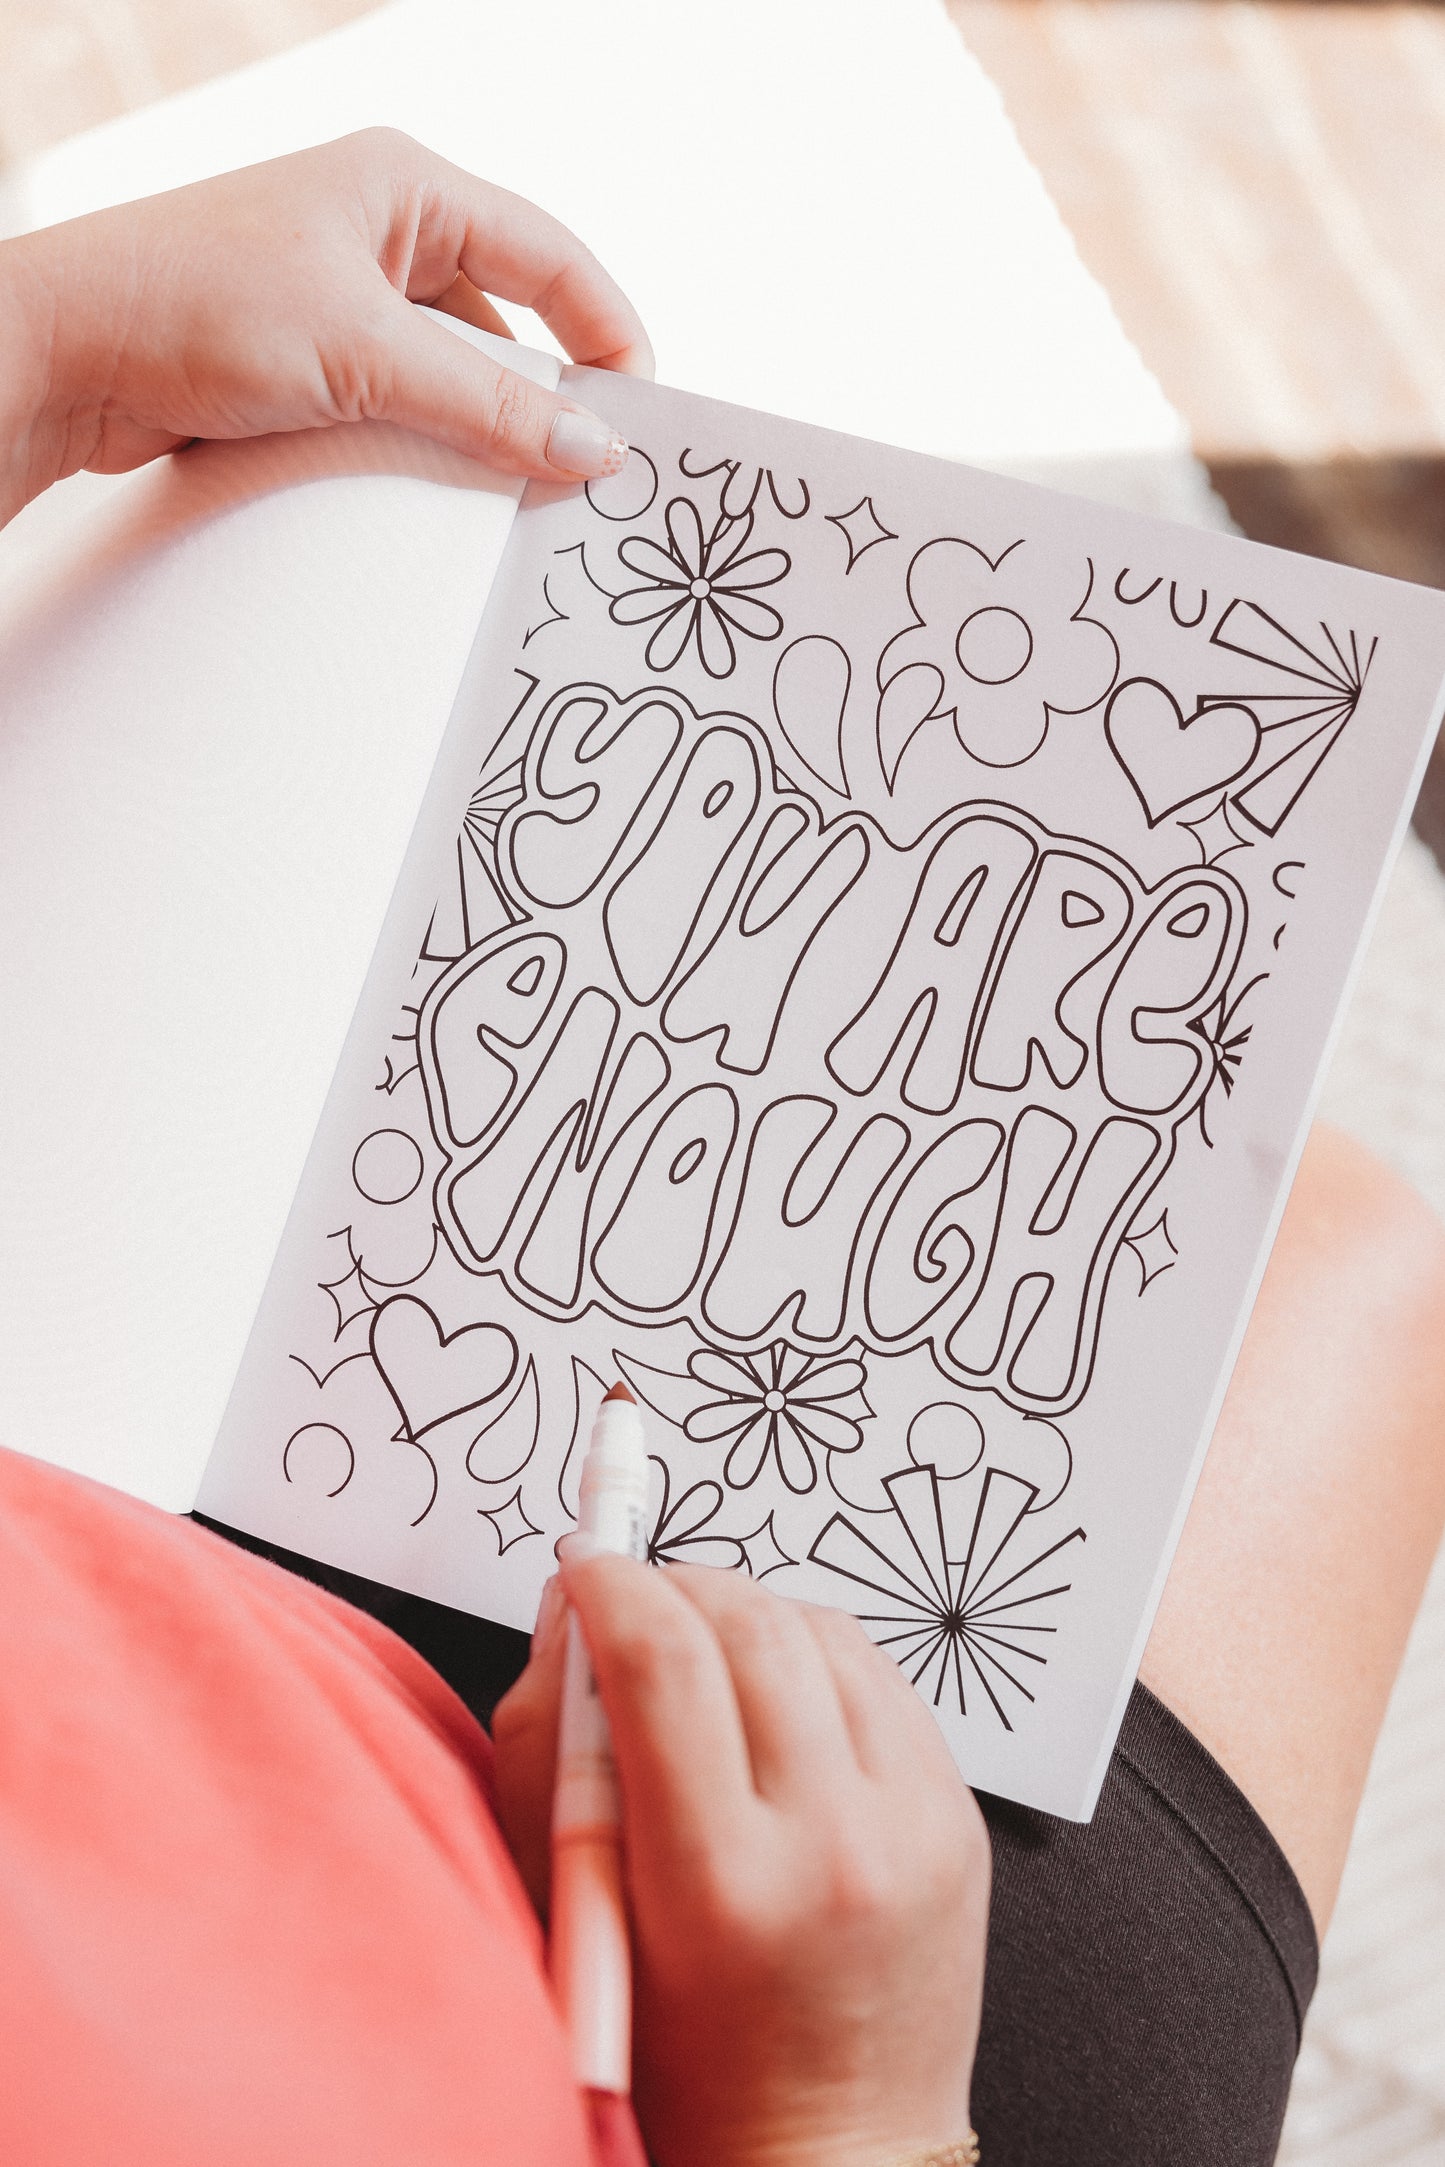 Feeling' Groovy Affirmations Coloring Book